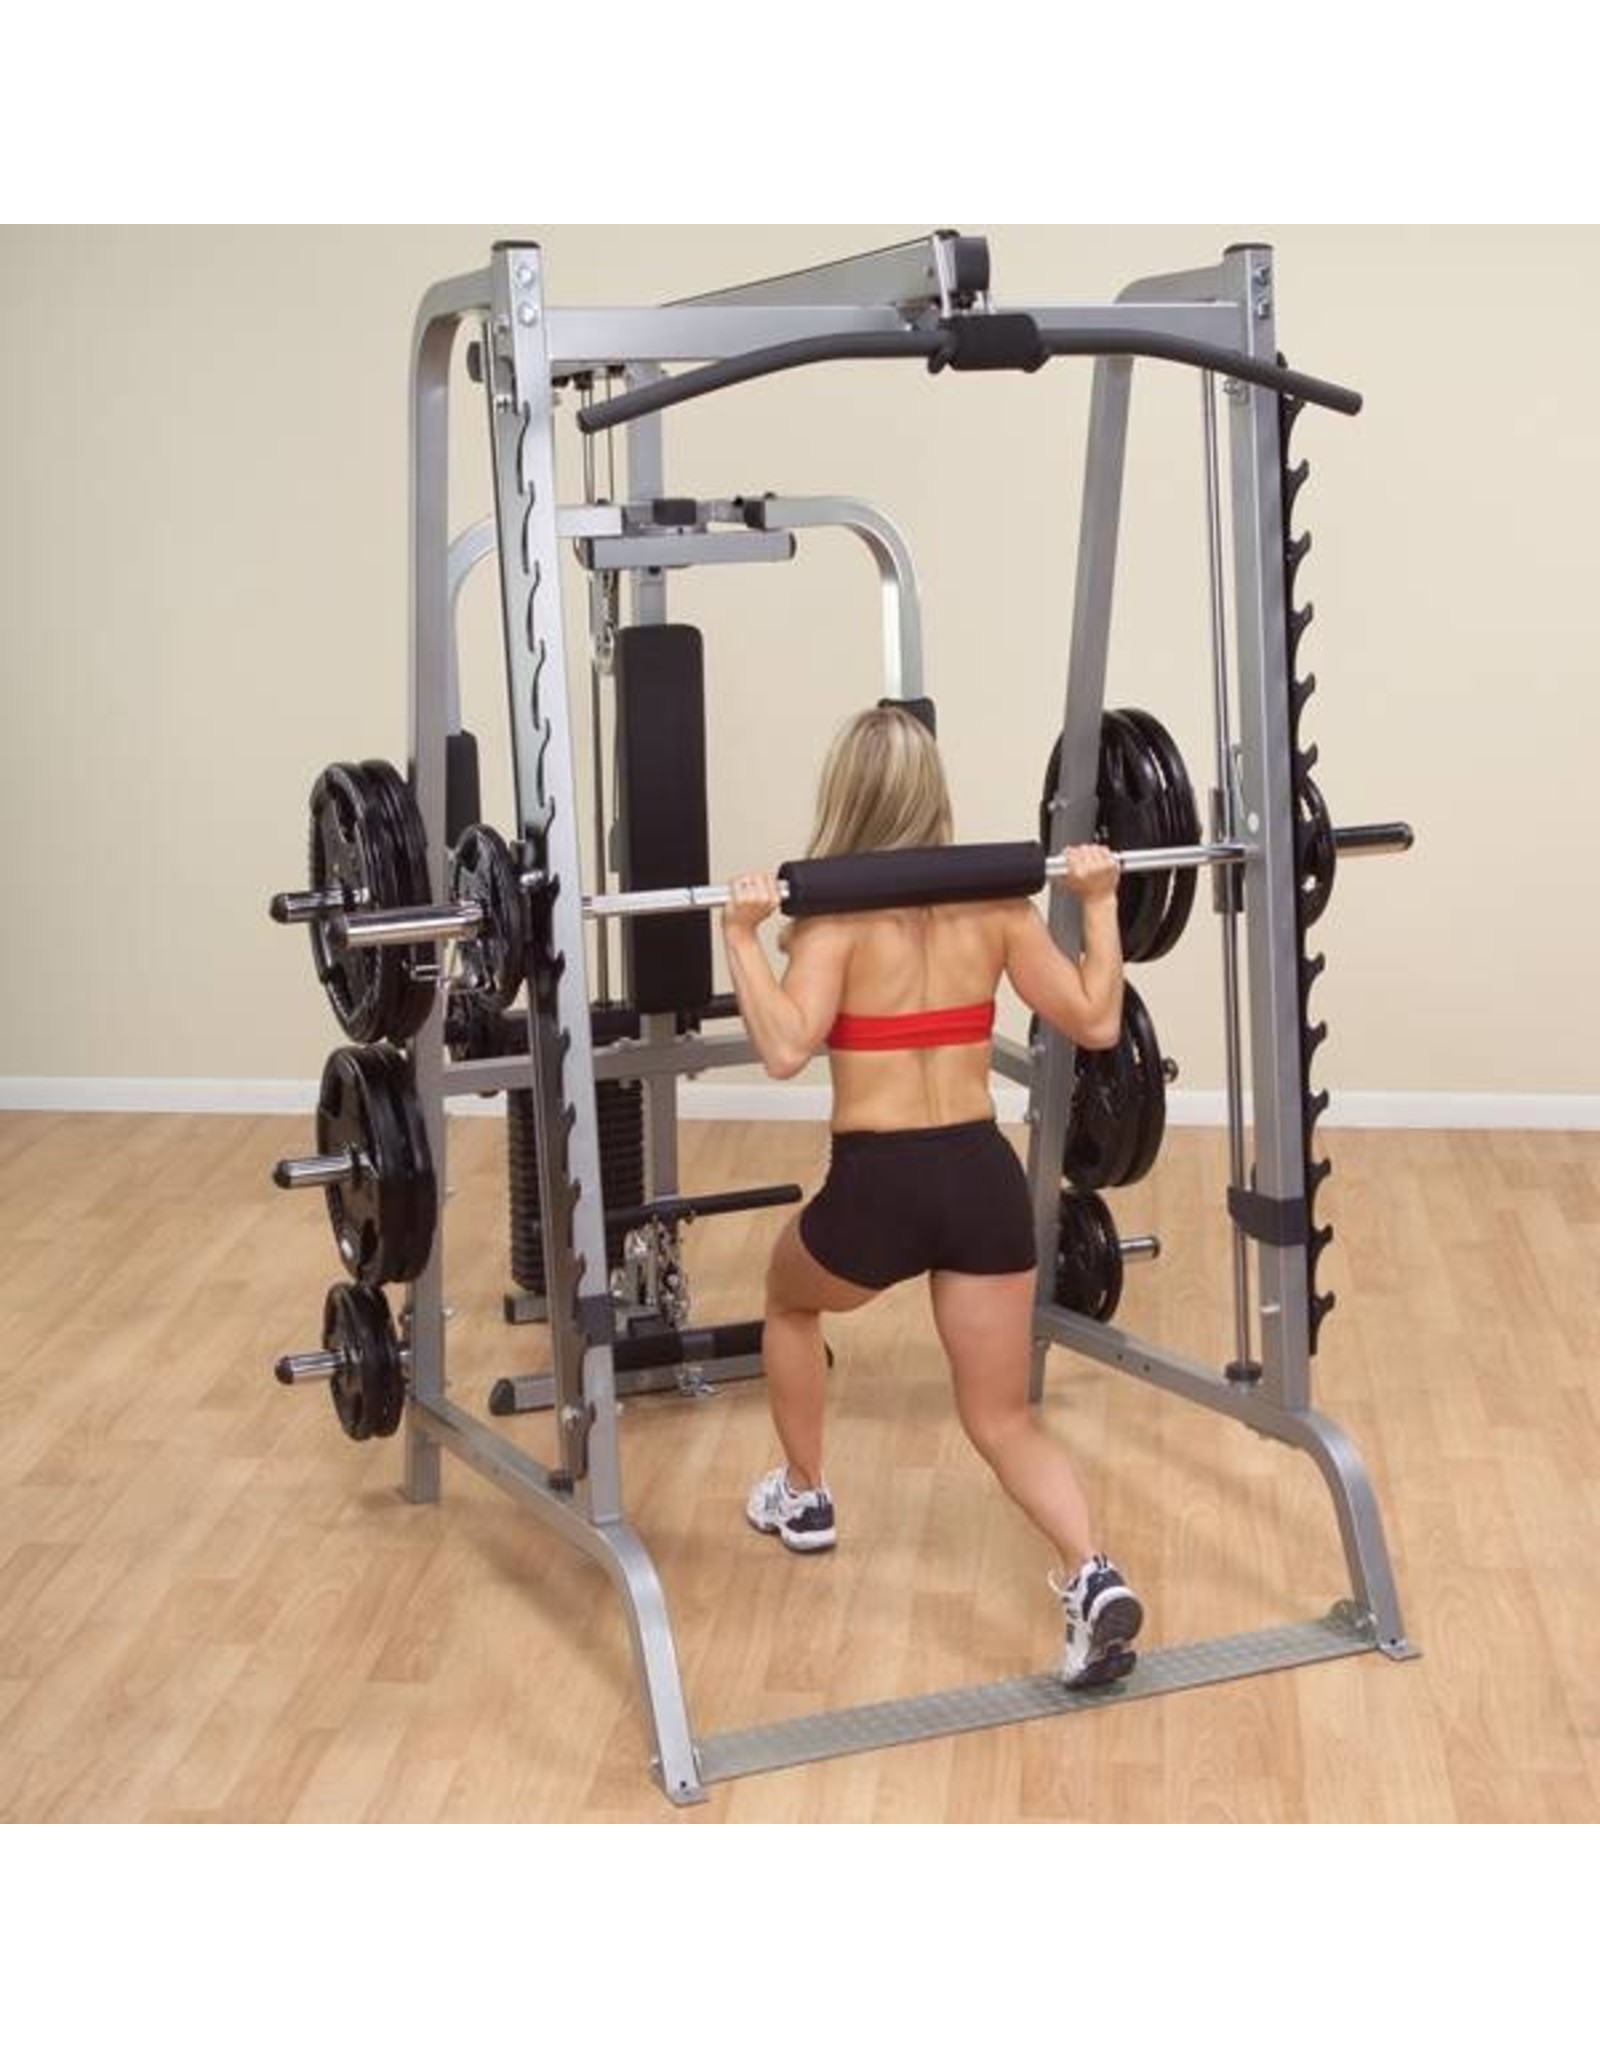 Body-Solid Body-Solid GS348 Series 7 Smith Machine Full Option